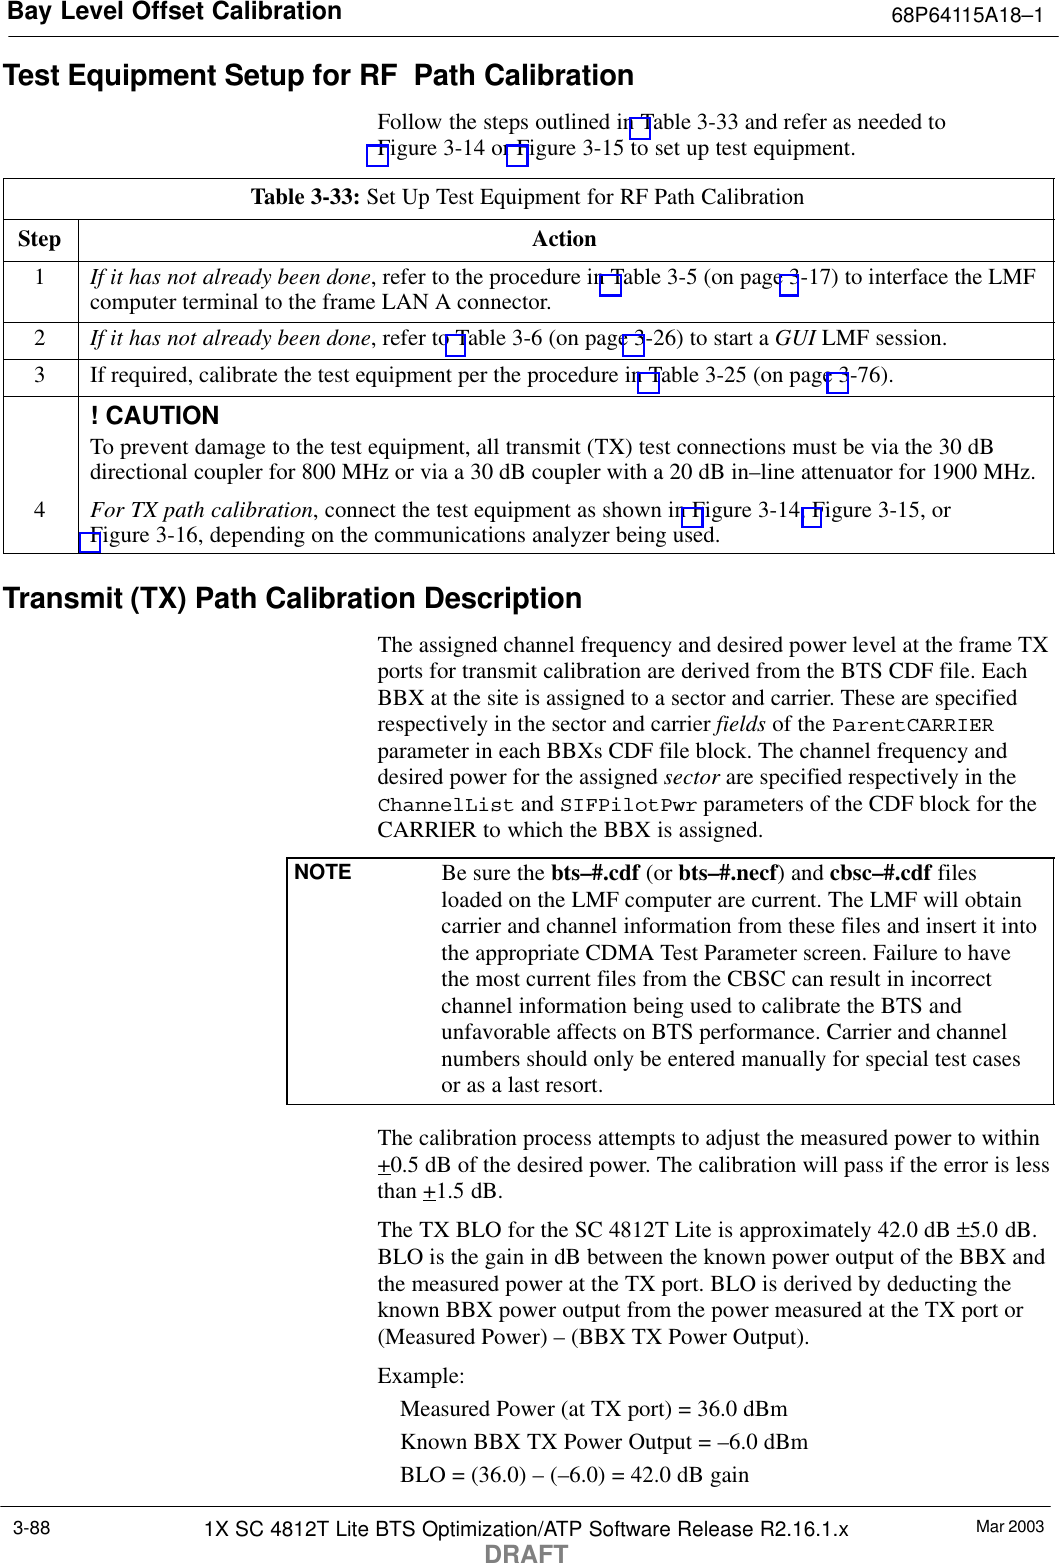 Bay Level Offset Calibration 68P64115A18–1Mar 20031X SC 4812T Lite BTS Optimization/ATP Software Release R2.16.1.xDRAFT3-88Test Equipment Setup for RF Path CalibrationFollow the steps outlined in Table 3-33 and refer as needed toFigure 3-14 or Figure 3-15 to set up test equipment.Table 3-33: Set Up Test Equipment for RF Path CalibrationStep Action1If it has not already been done, refer to the procedure in Table 3-5 (on page 3-17) to interface the LMFcomputer terminal to the frame LAN A connector.2If it has not already been done, refer to Table 3-6 (on page 3-26) to start a GUI LMF session.3If required, calibrate the test equipment per the procedure in Table 3-25 (on page 3-76).! CAUTIONTo prevent damage to the test equipment, all transmit (TX) test connections must be via the 30 dBdirectional coupler for 800 MHz or via a 30 dB coupler with a 20 dB in–line attenuator for 1900 MHz.4For TX path calibration, connect the test equipment as shown in Figure 3-14, Figure 3-15, orFigure 3-16, depending on the communications analyzer being used.Transmit (TX) Path Calibration DescriptionThe assigned channel frequency and desired power level at the frame TXports for transmit calibration are derived from the BTS CDF file. EachBBX at the site is assigned to a sector and carrier. These are specifiedrespectively in the sector and carrier fields of the ParentCARRIERparameter in each BBXs CDF file block. The channel frequency anddesired power for the assigned sector are specified respectively in theChannelList and SIFPilotPwr parameters of the CDF block for theCARRIER to which the BBX is assigned.NOTE Be sure the bts–#.cdf (or bts–#.necf) and cbsc–#.cdf filesloaded on the LMF computer are current. The LMF will obtaincarrier and channel information from these files and insert it intothe appropriate CDMA Test Parameter screen. Failure to havethe most current files from the CBSC can result in incorrectchannel information being used to calibrate the BTS andunfavorable affects on BTS performance. Carrier and channelnumbers should only be entered manually for special test casesor as a last resort.The calibration process attempts to adjust the measured power to within+0.5 dB of the desired power. The calibration will pass if the error is lessthan +1.5 dB.The TX BLO for the SC 4812T Lite is approximately 42.0 dB ±5.0 dB.BLO is the gain in dB between the known power output of the BBX andthe measured power at the TX port. BLO is derived by deducting theknown BBX power output from the power measured at the TX port or(Measured Power) – (BBX TX Power Output).Example:Measured Power (at TX port) = 36.0 dBmKnown BBX TX Power Output = –6.0 dBmBLO = (36.0) – (–6.0) = 42.0 dB gain